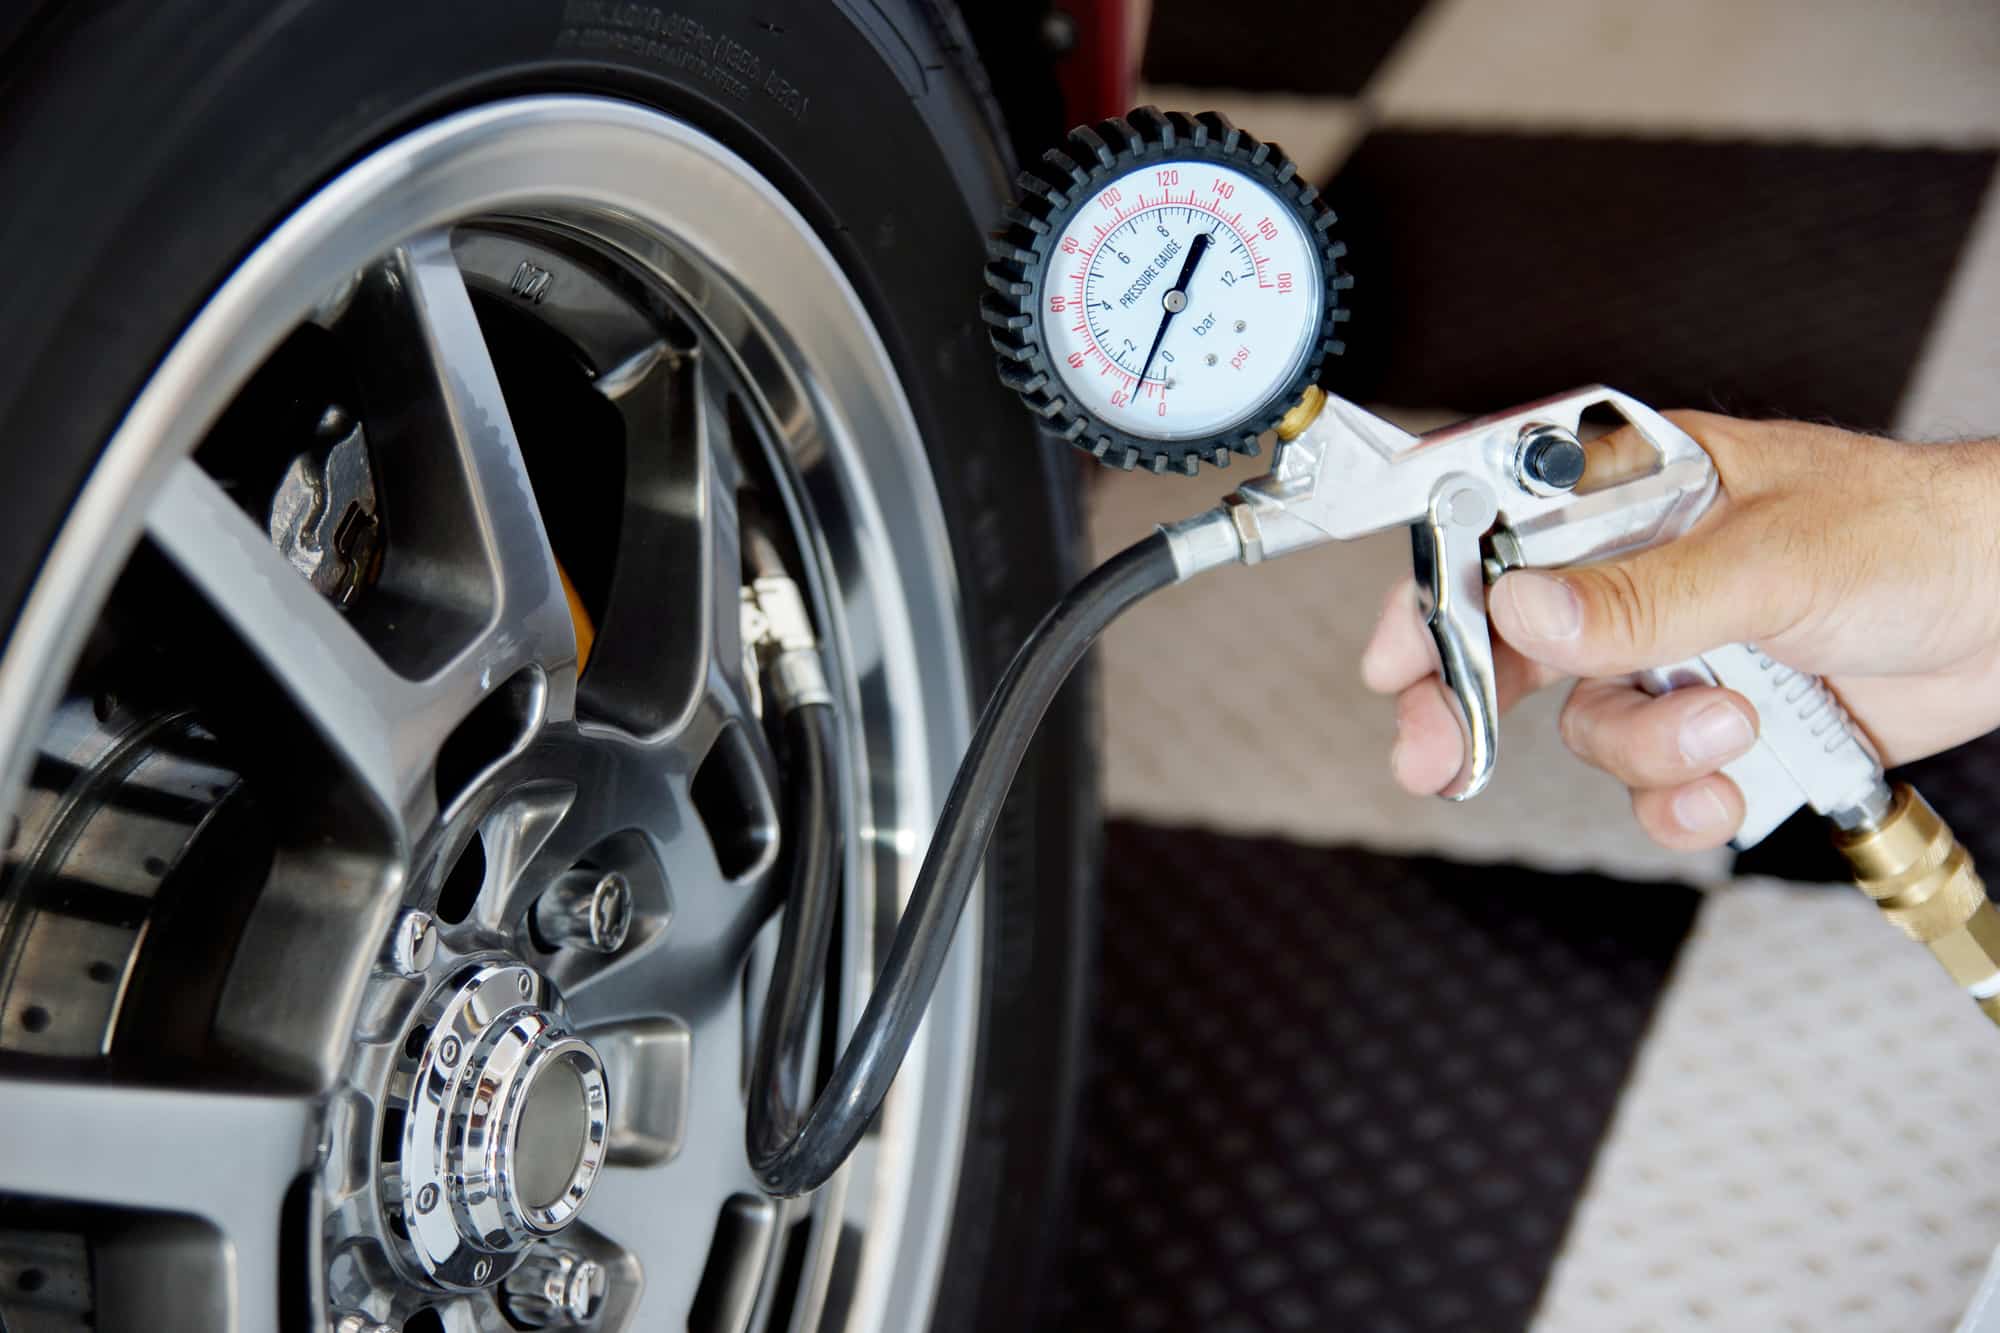 How to Check Air Pressure and Inflate Tires